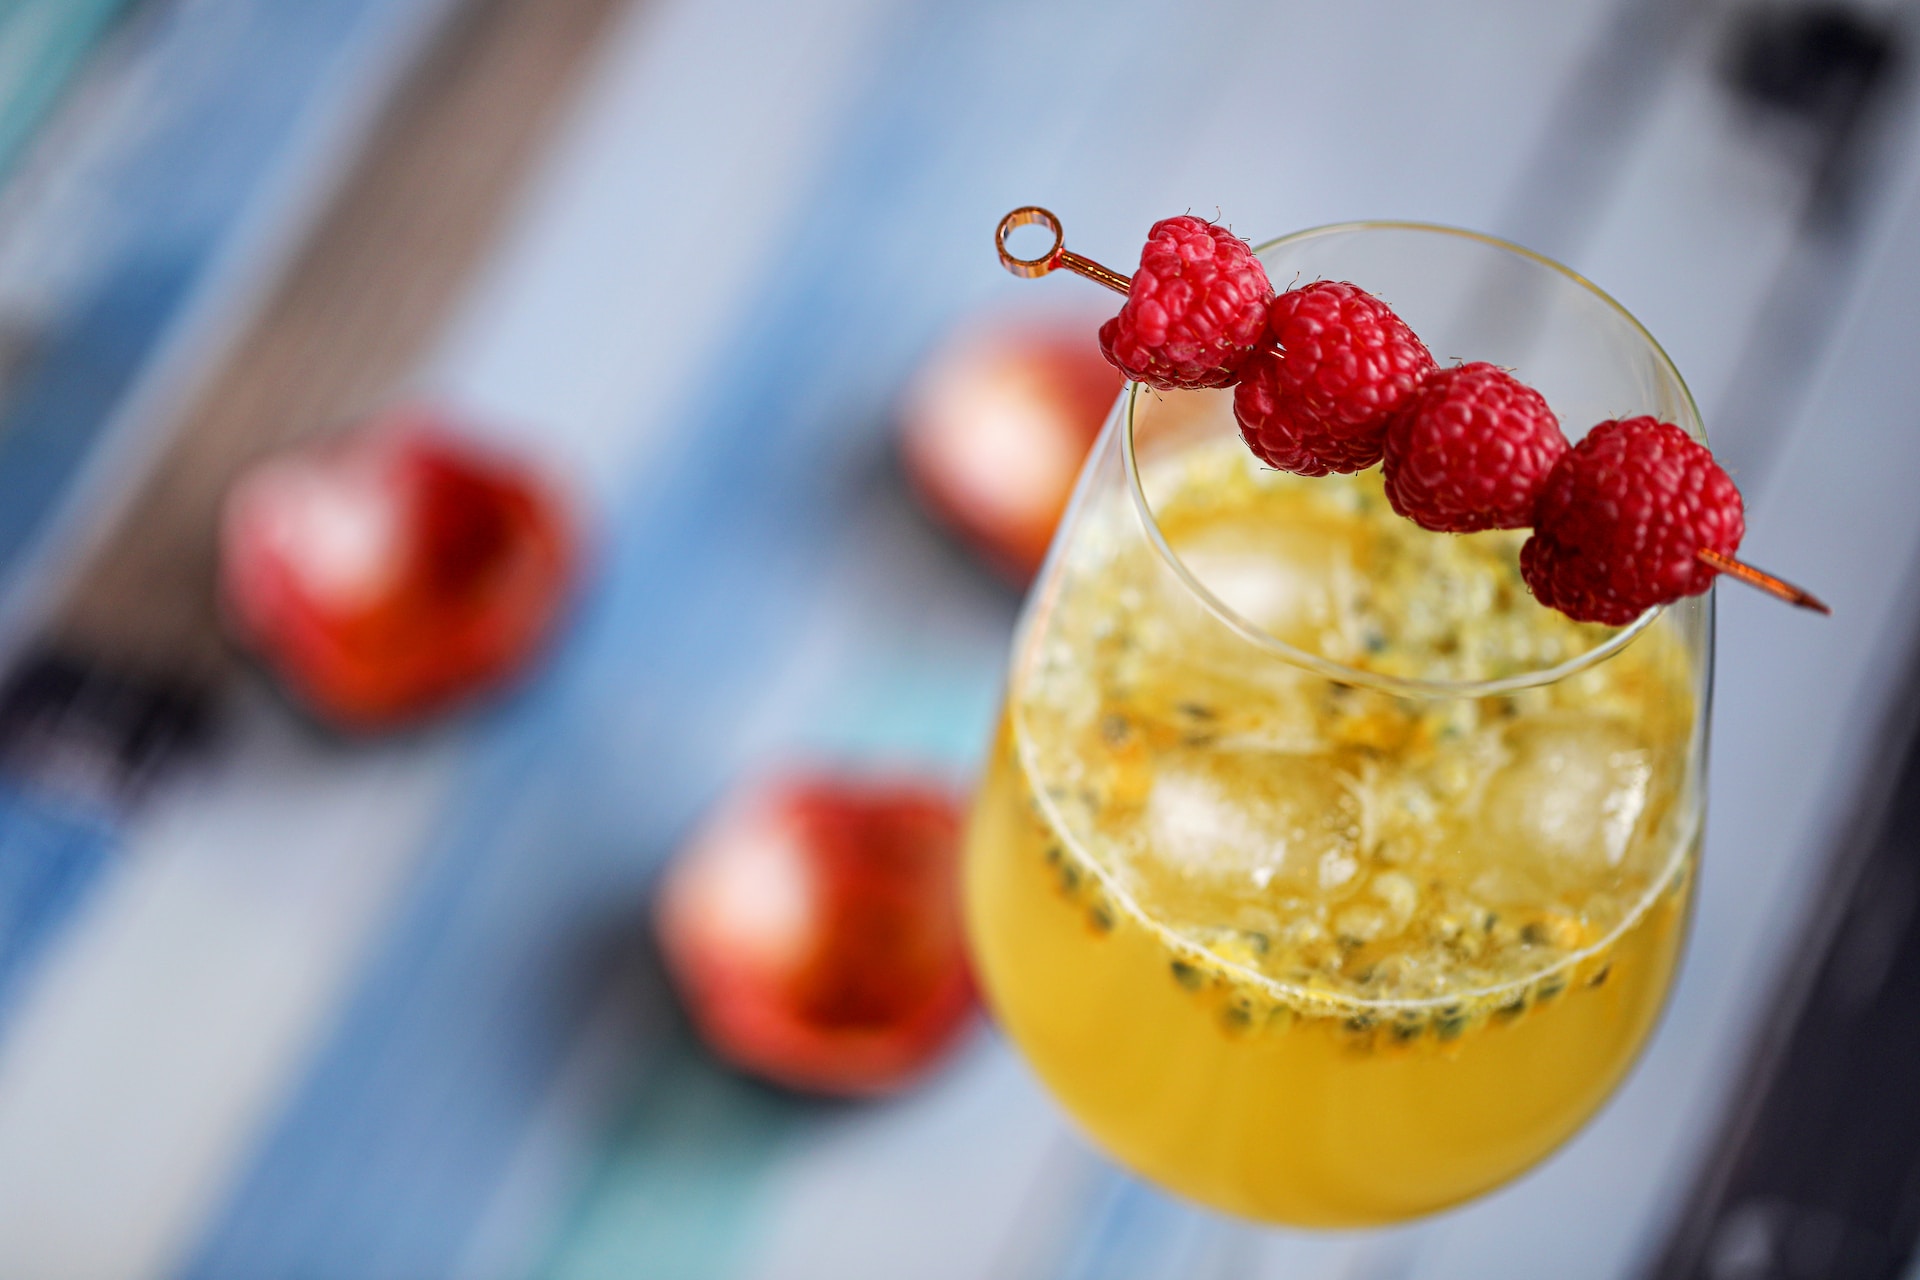 A yellow passionfruit vodka cocktail on a table garnished with raspberries on a cocktail pick